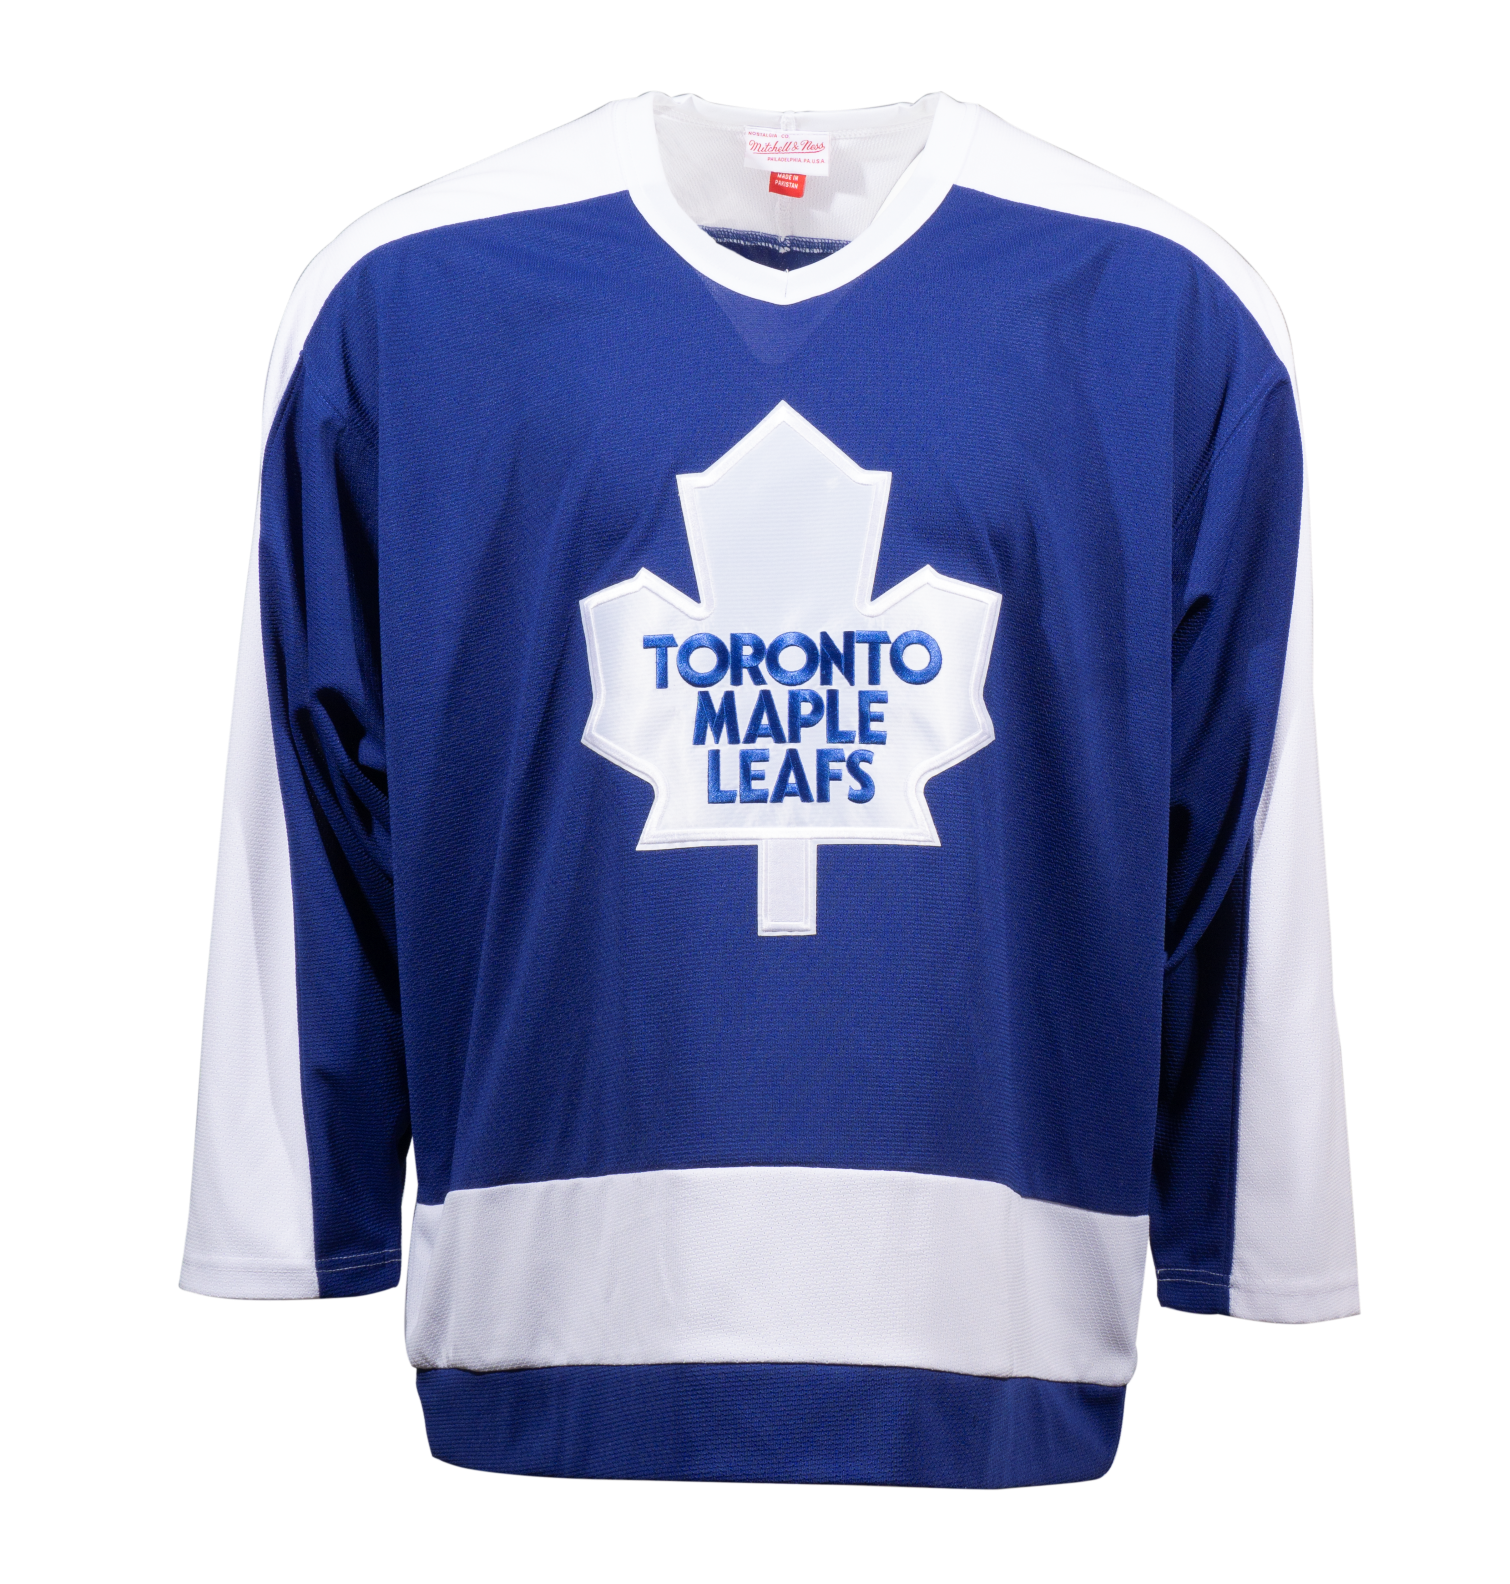 Maple Leafs Mitchell & Ness Men's Vintage Jersey, Large by Adidas | RealSports